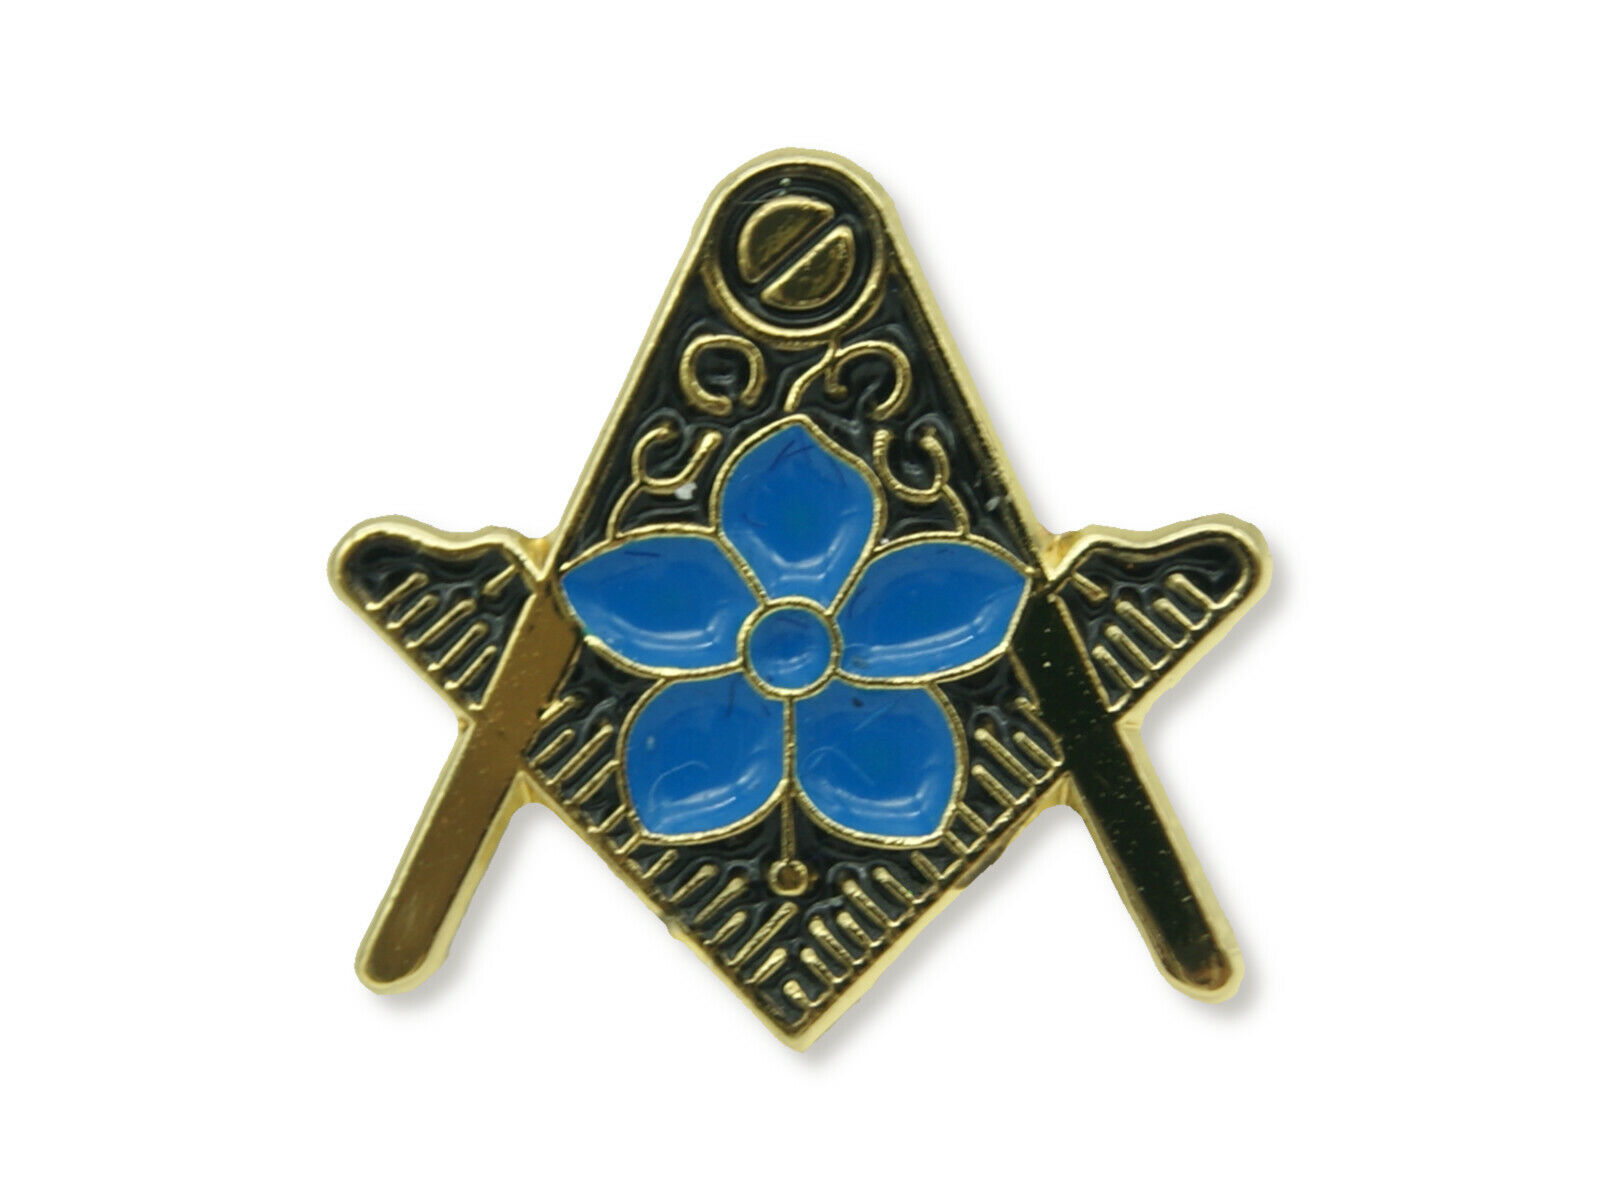 Freemasons Gold Square and Compass Lapel Pin with Masonic Forget Me Not - LP54